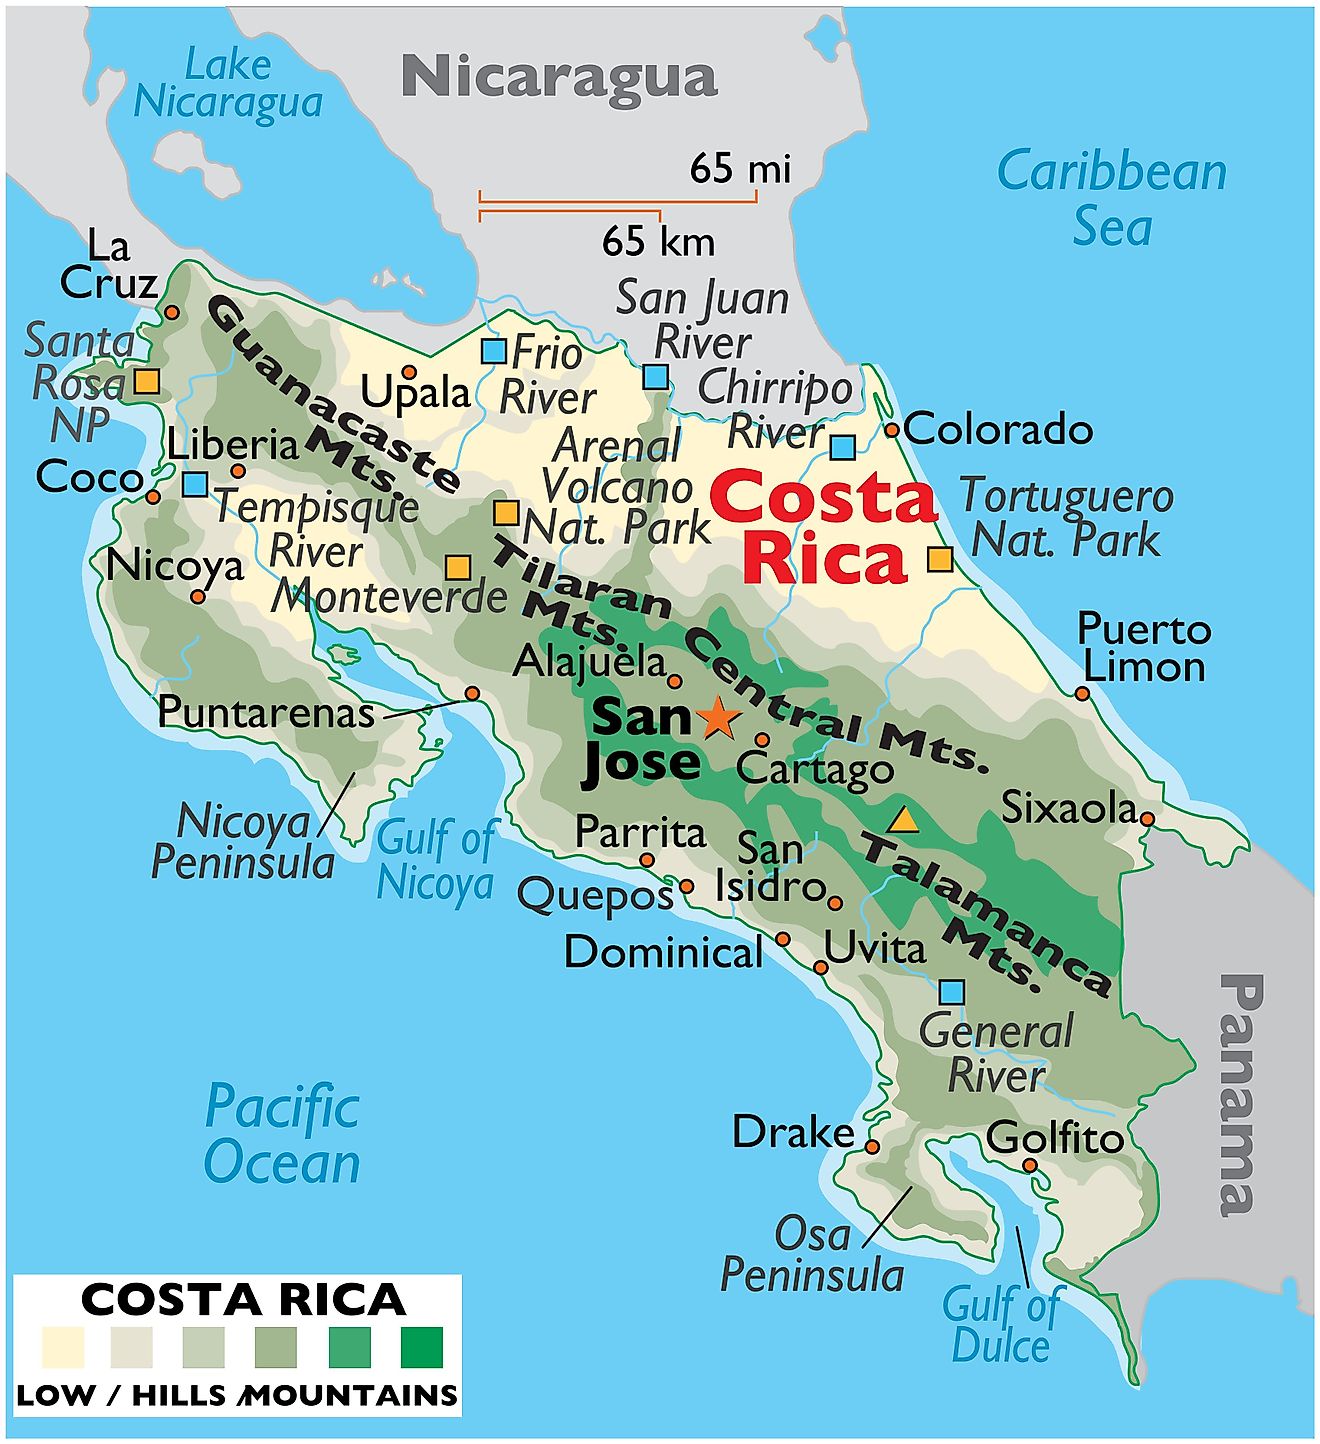 Physical Map of Costa Rica showing relief, major rivers, mountain ranges, the highest point, important cities, international borders, etc.